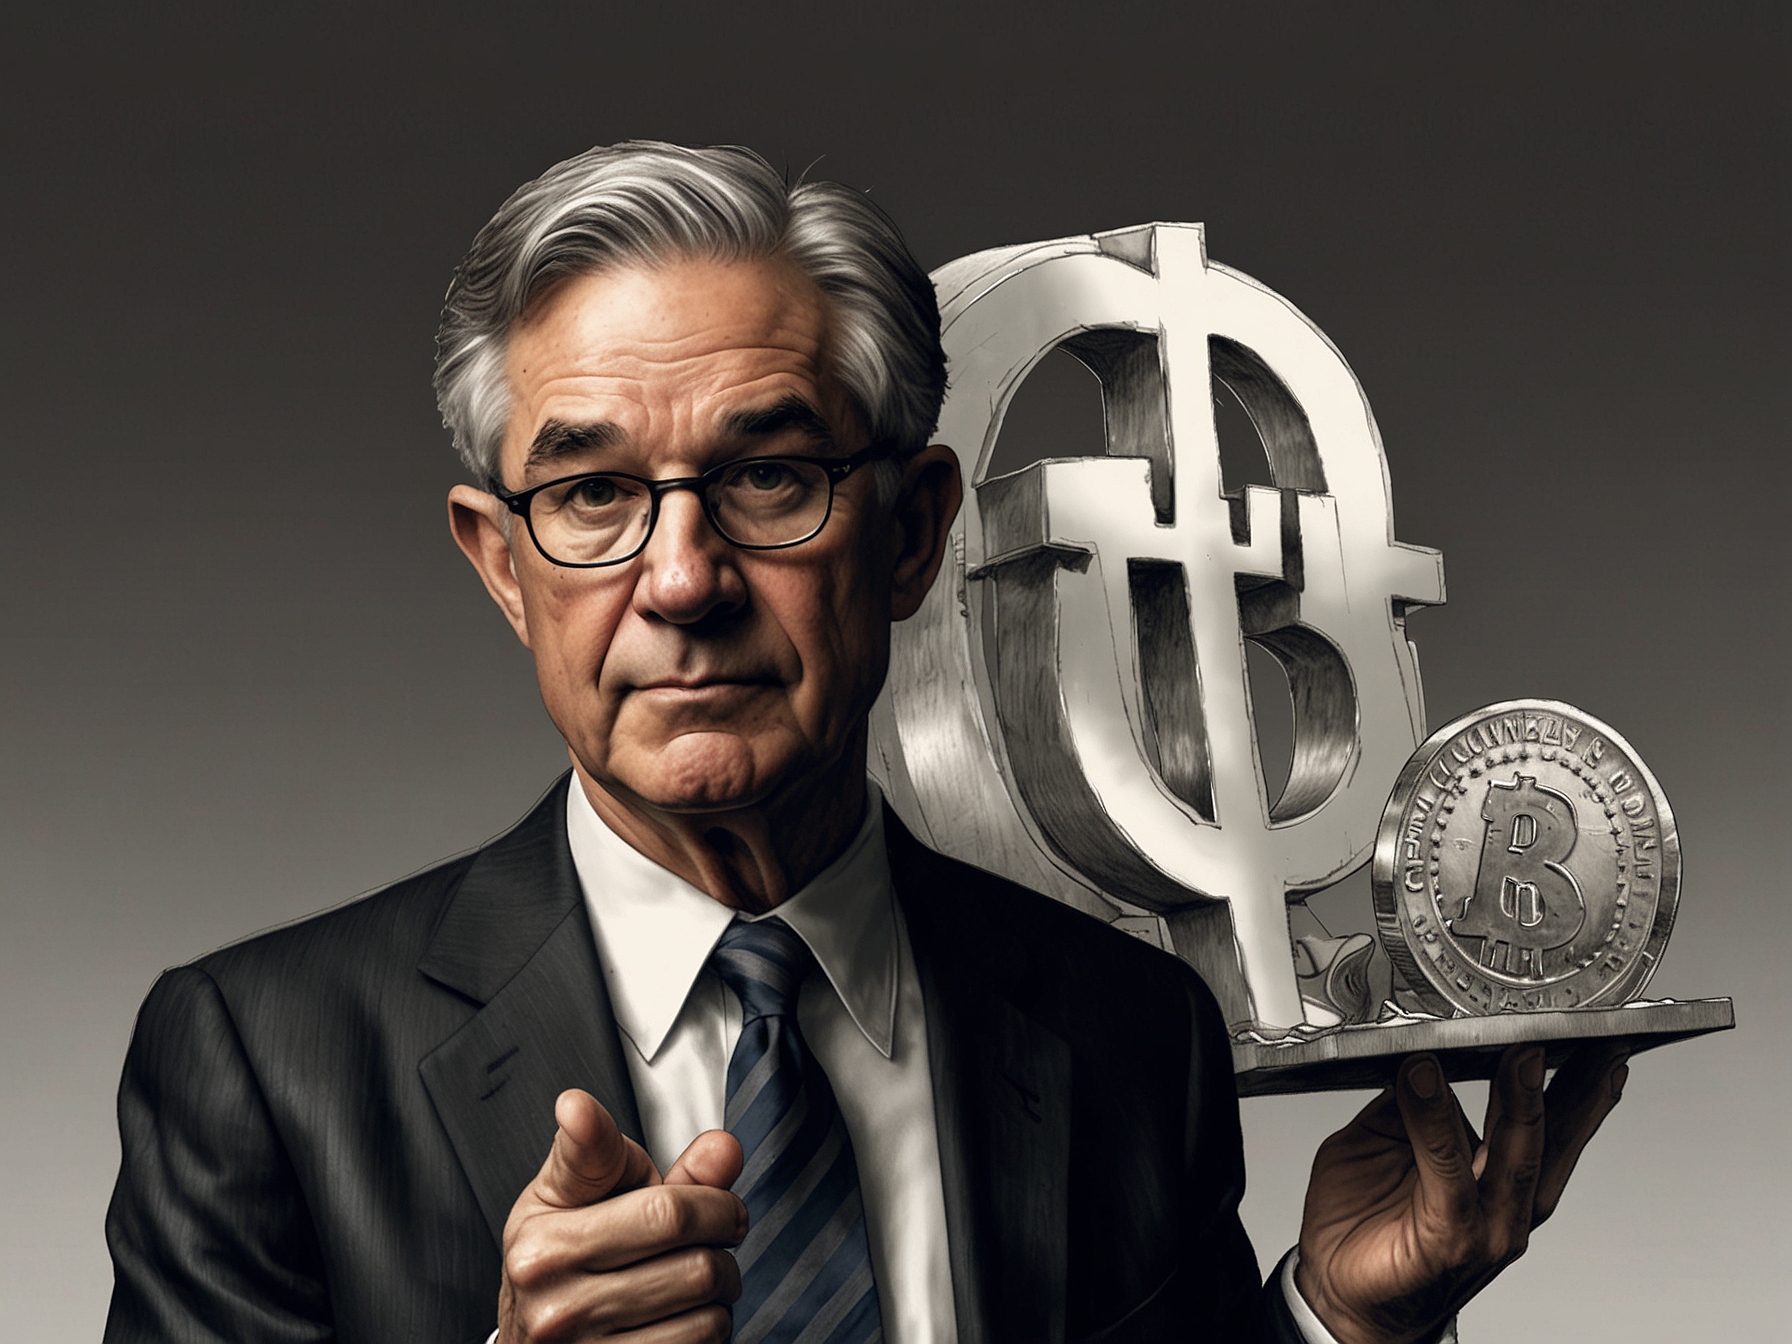 An illustration showing Jerome Powell holding a dollar symbol, representing the dual nature of the Fed's cautious optimism and readiness for aggressive action to maintain economic stability.